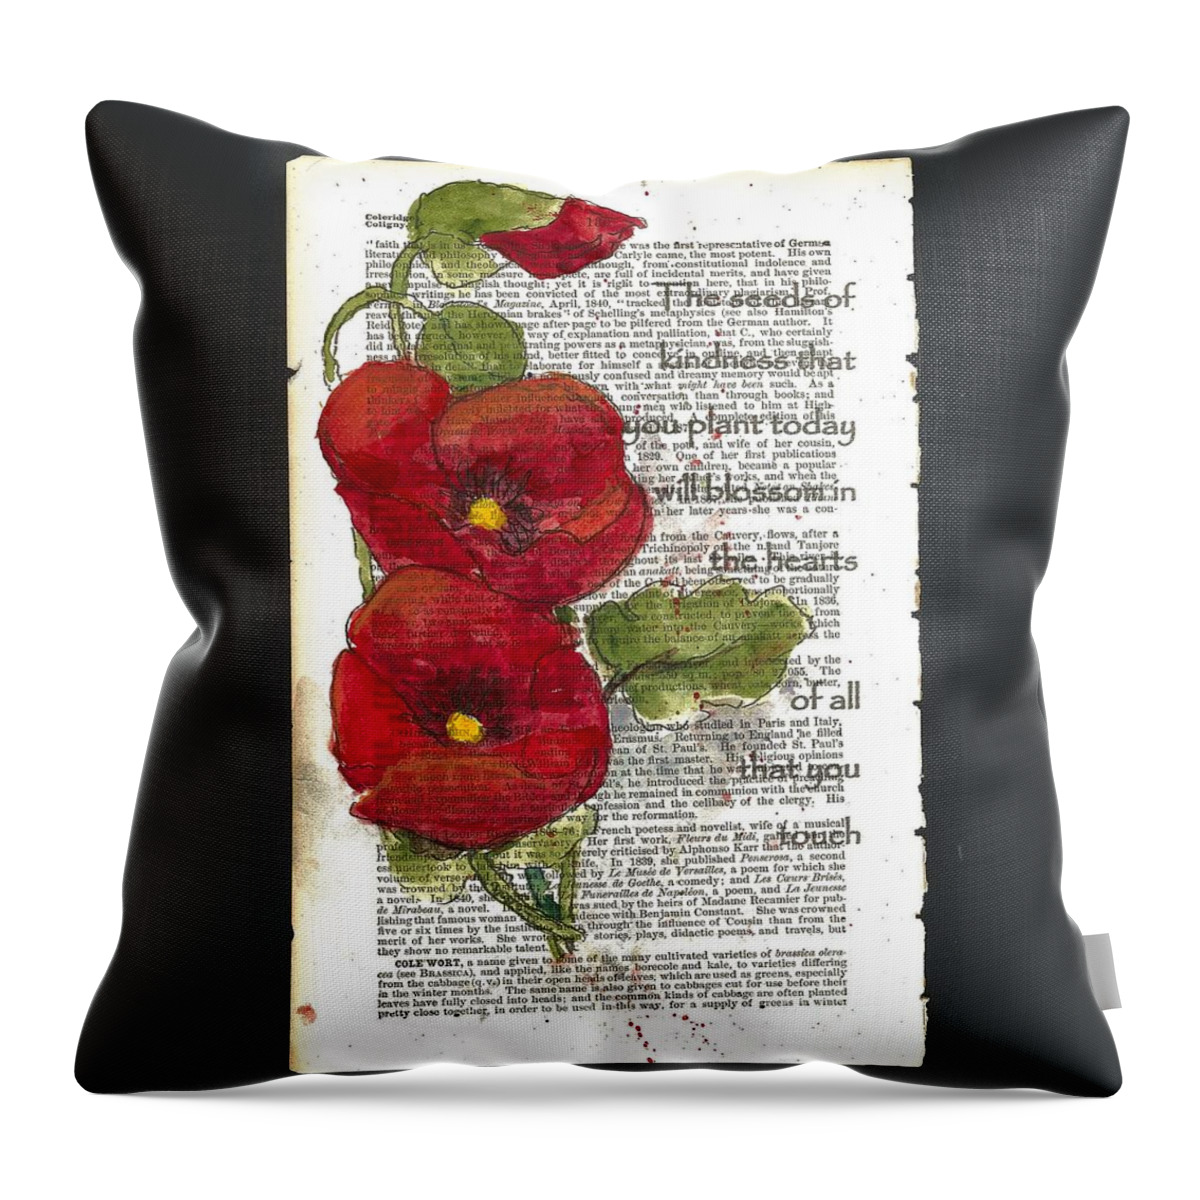 Inspirational Text Throw Pillow featuring the painting Your Kindness by Maria Hunt